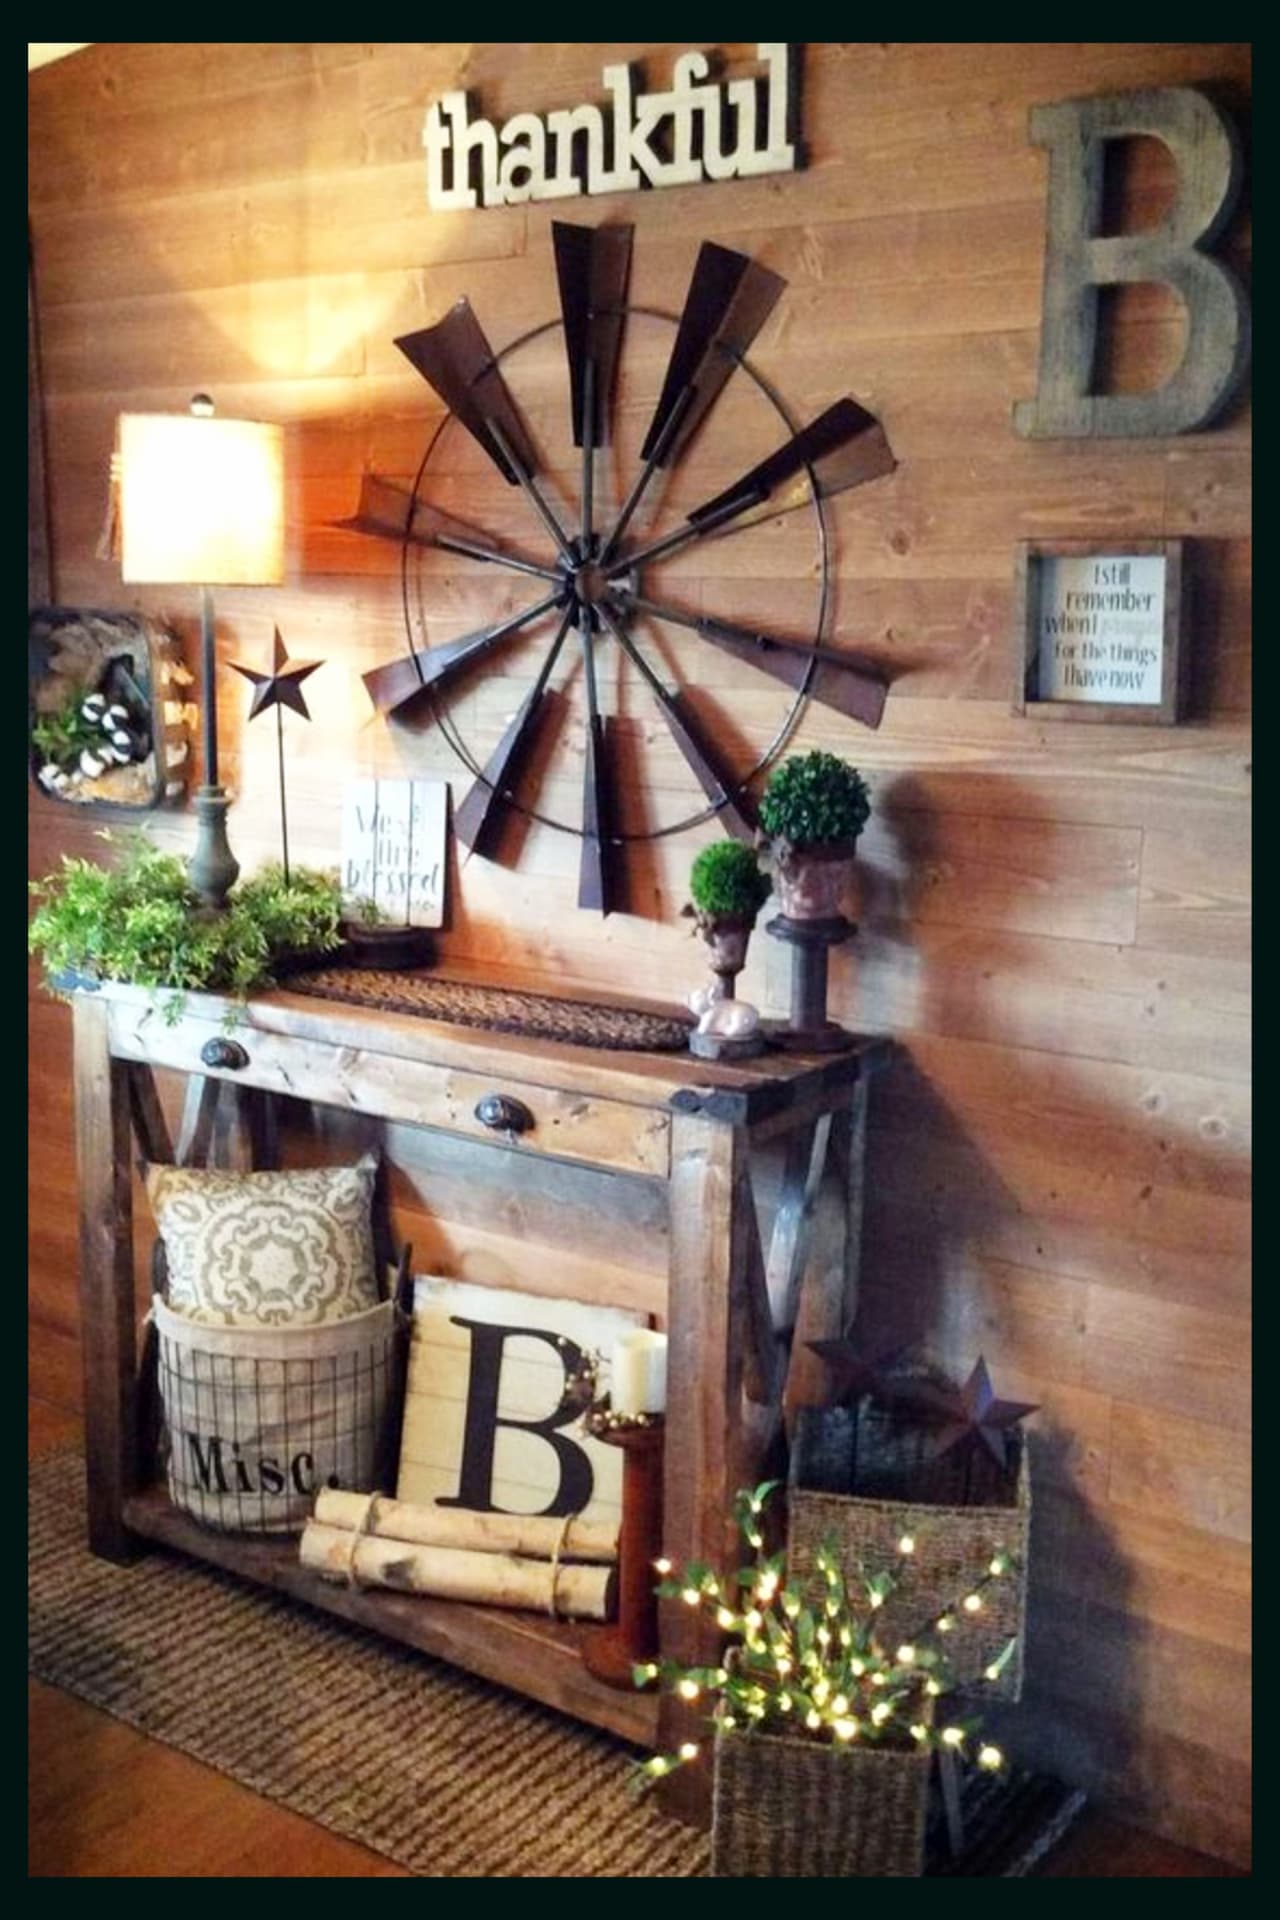 foyer accent wall ideas I LOVE - DIY decorating in farmhouse style! Love this rustic farmhouse foyer decor! The pallet wood wall and accent wall decorations and home accessories are GORGEOUS!